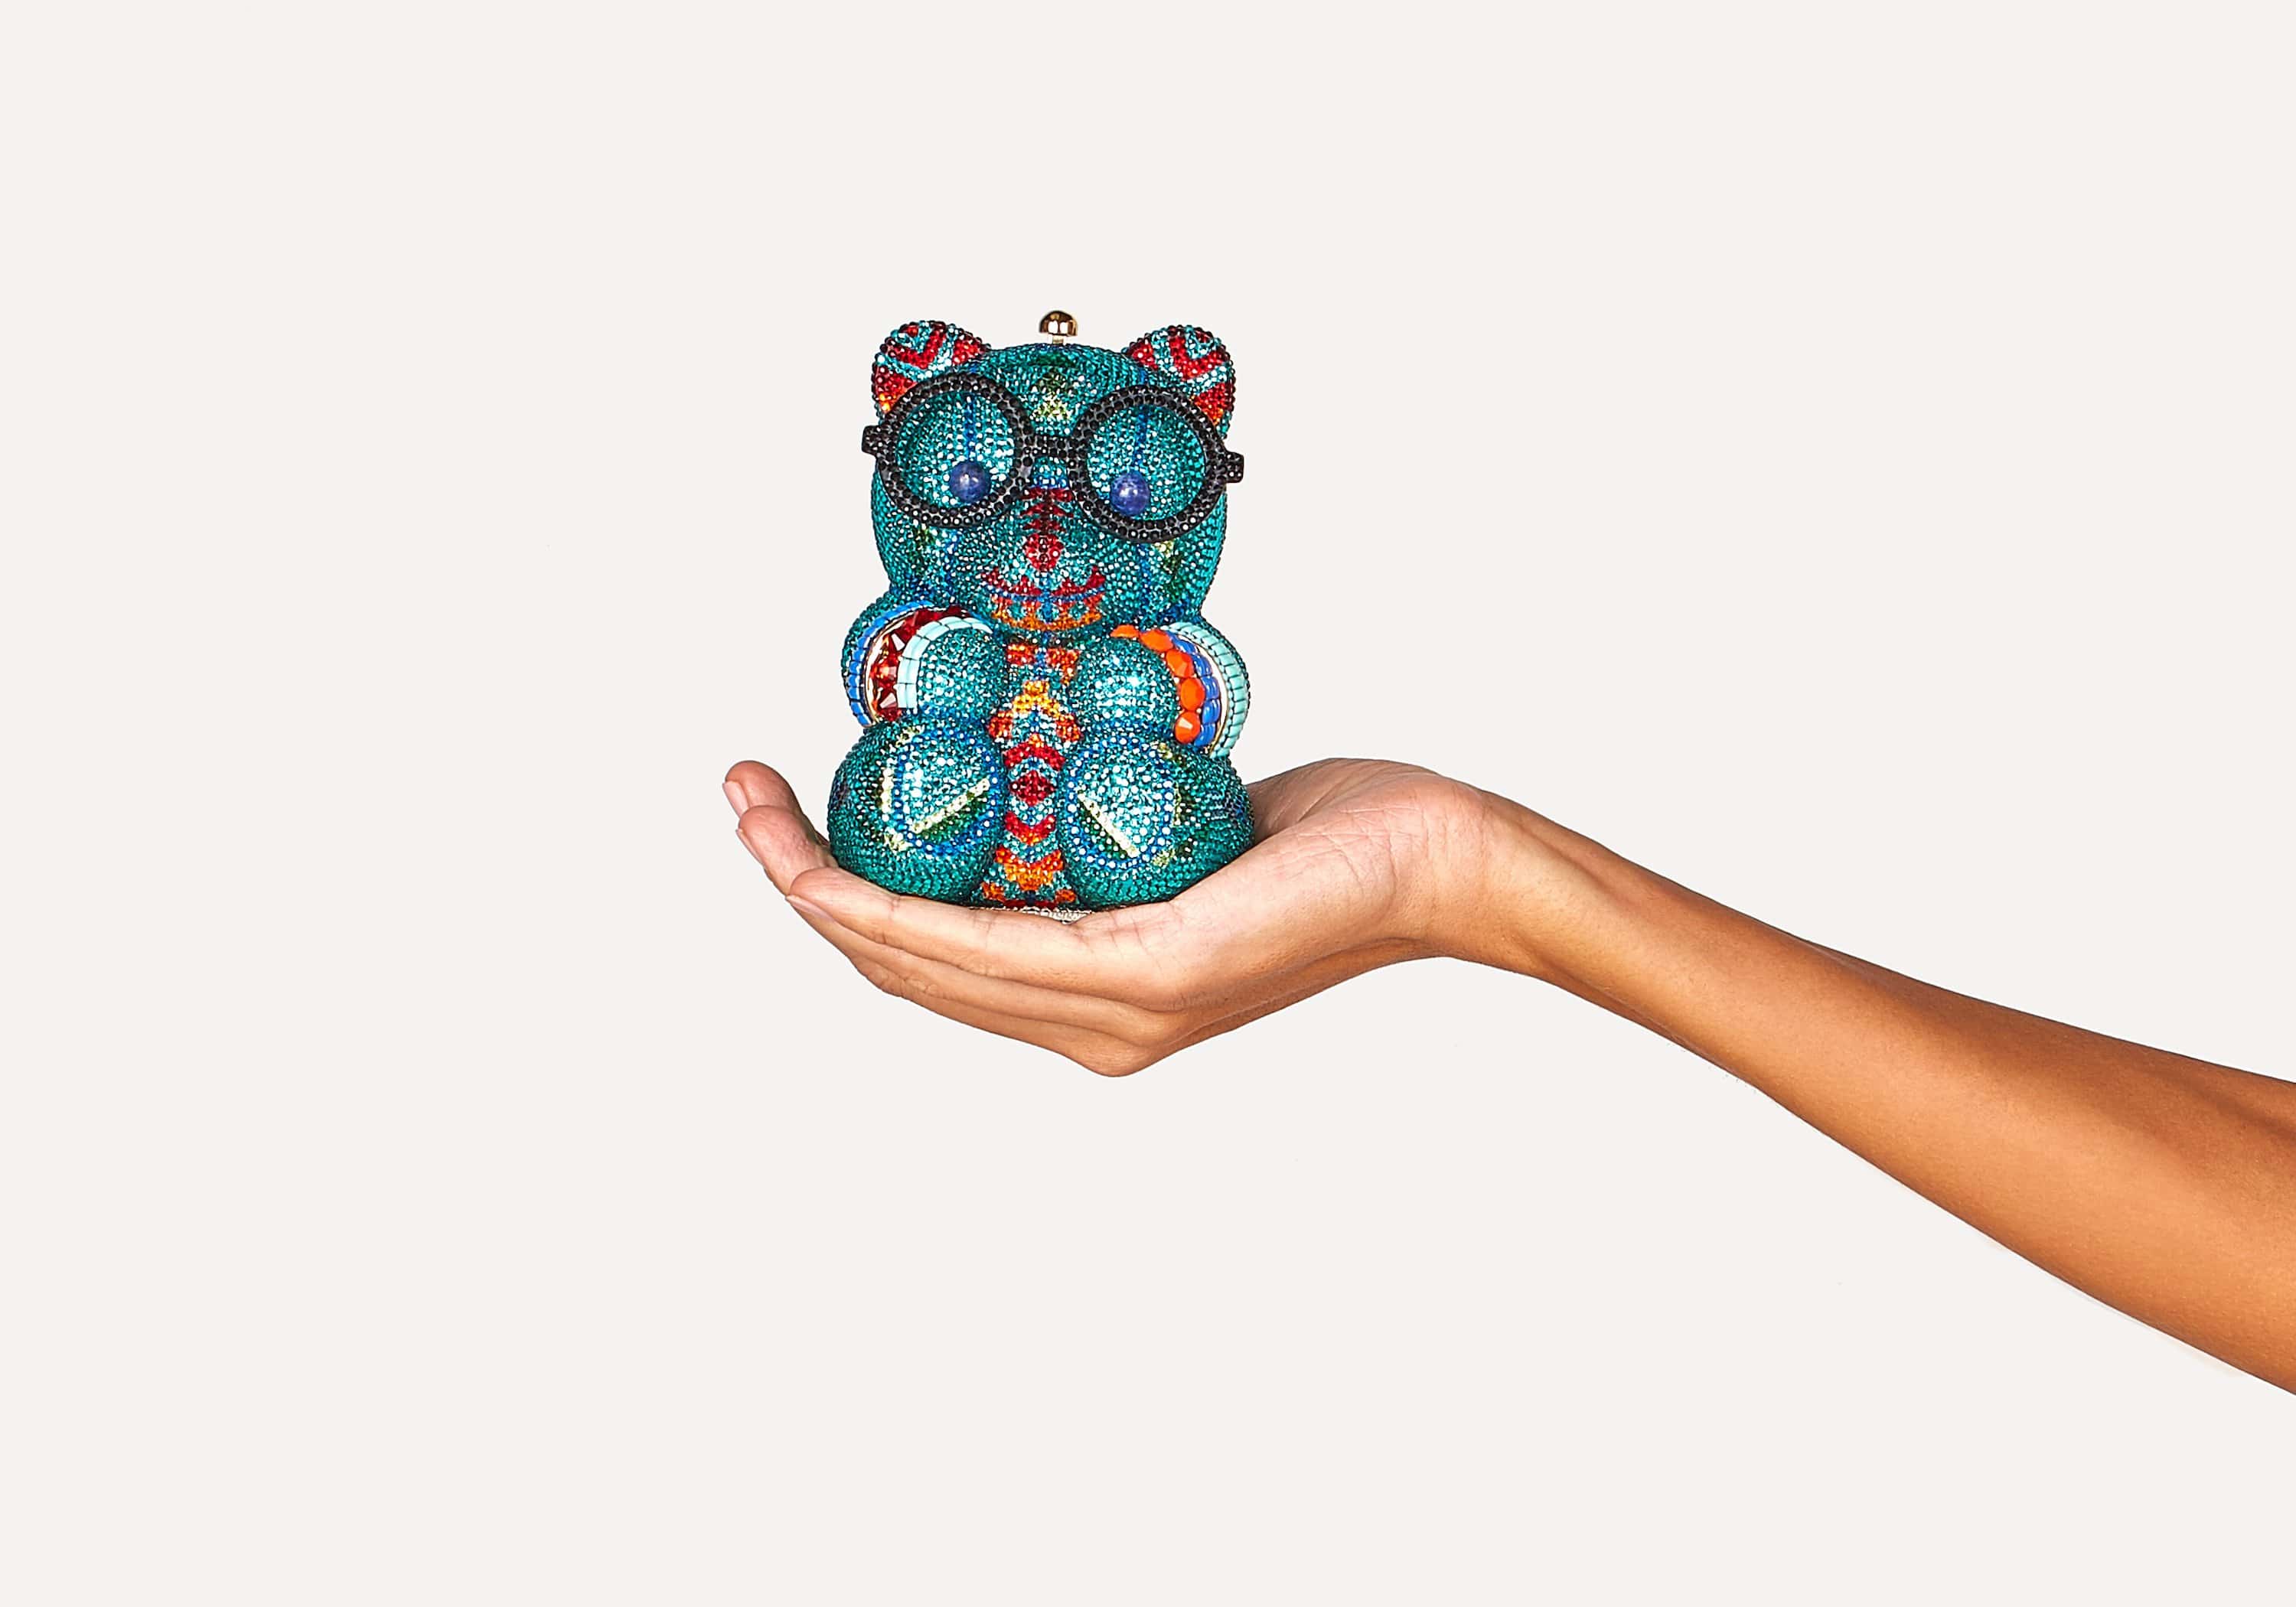 Gucci launches teddy bear-shaped crystal Minaudière bags for RM191K